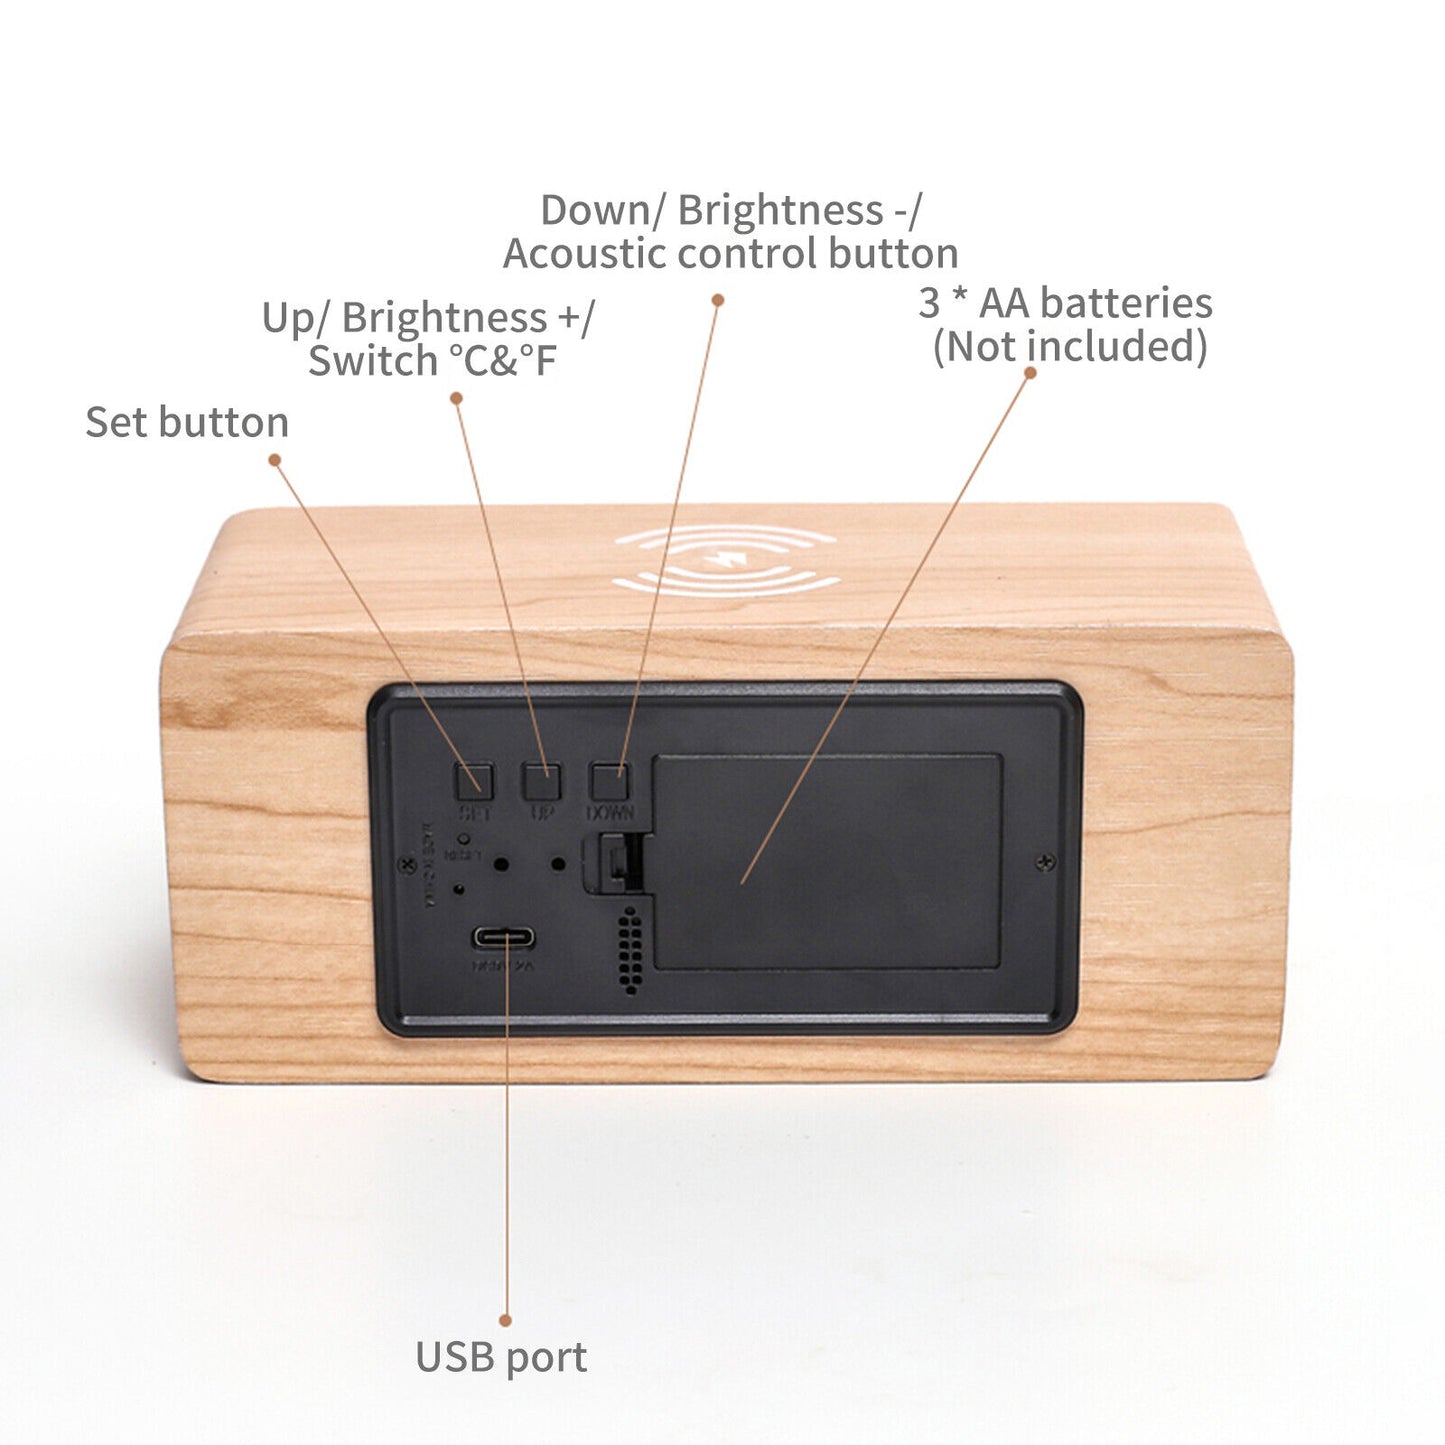 Bamboo Alarm Clock Thermometer Date Wireless Charger